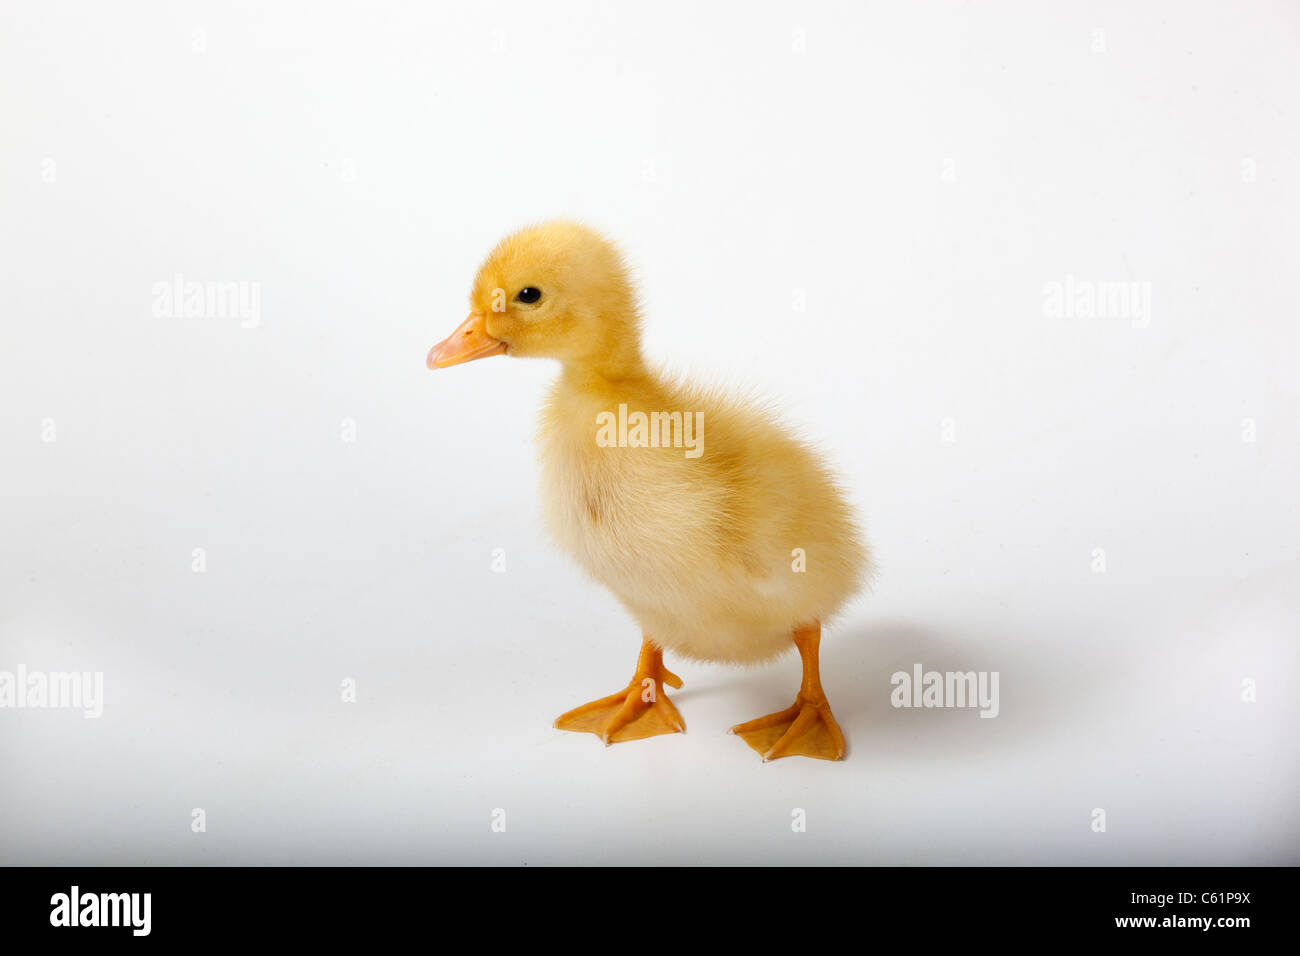 Newly hatched Ducklings on white background Stock Photo